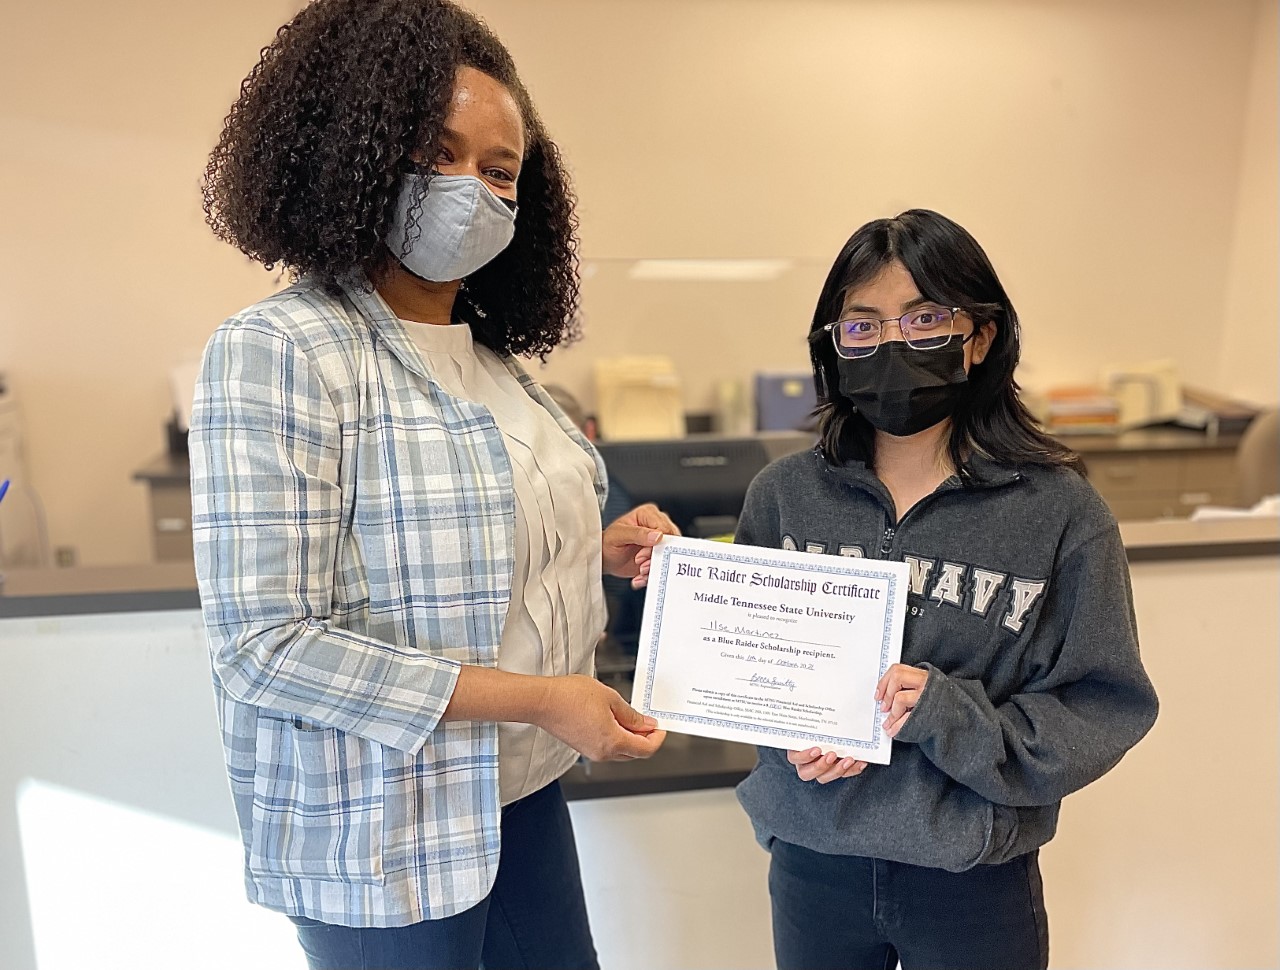 Ilse Martinez receives her MTSU Blue Raider Scholarship from Nashville State’s Assistant Director of Financial Aid Mary Louis at the College’s White Bridge campus